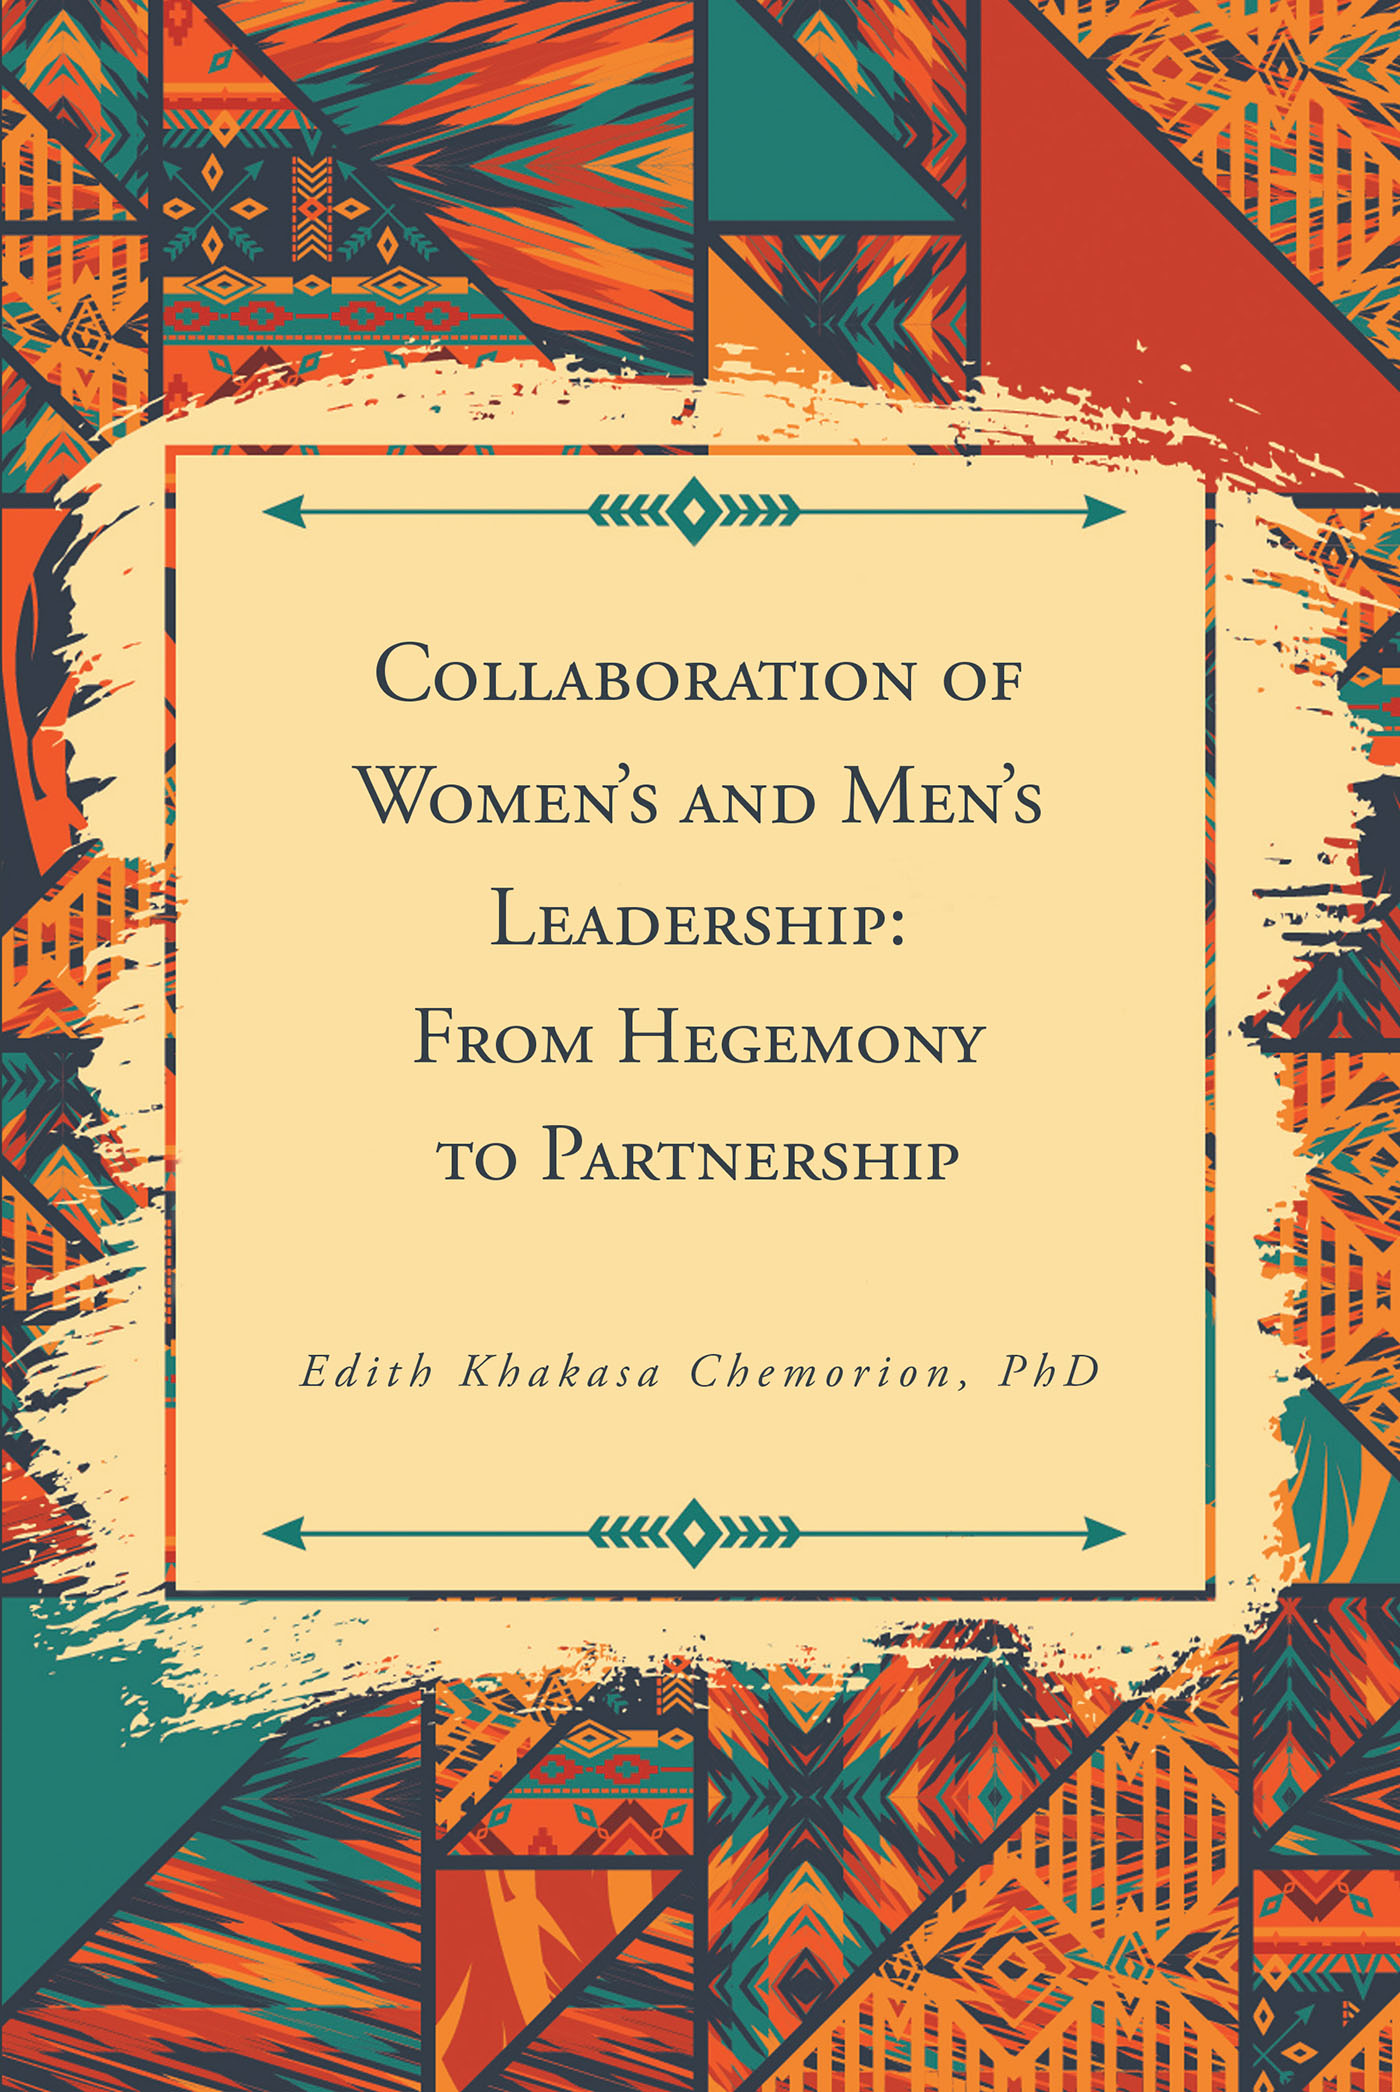 Edith Khakasa Chemorion, PhD’s Newly Released “Collaboration of Women’s and Men’s Leadership” is a Scholarly Study of Women in Ministry